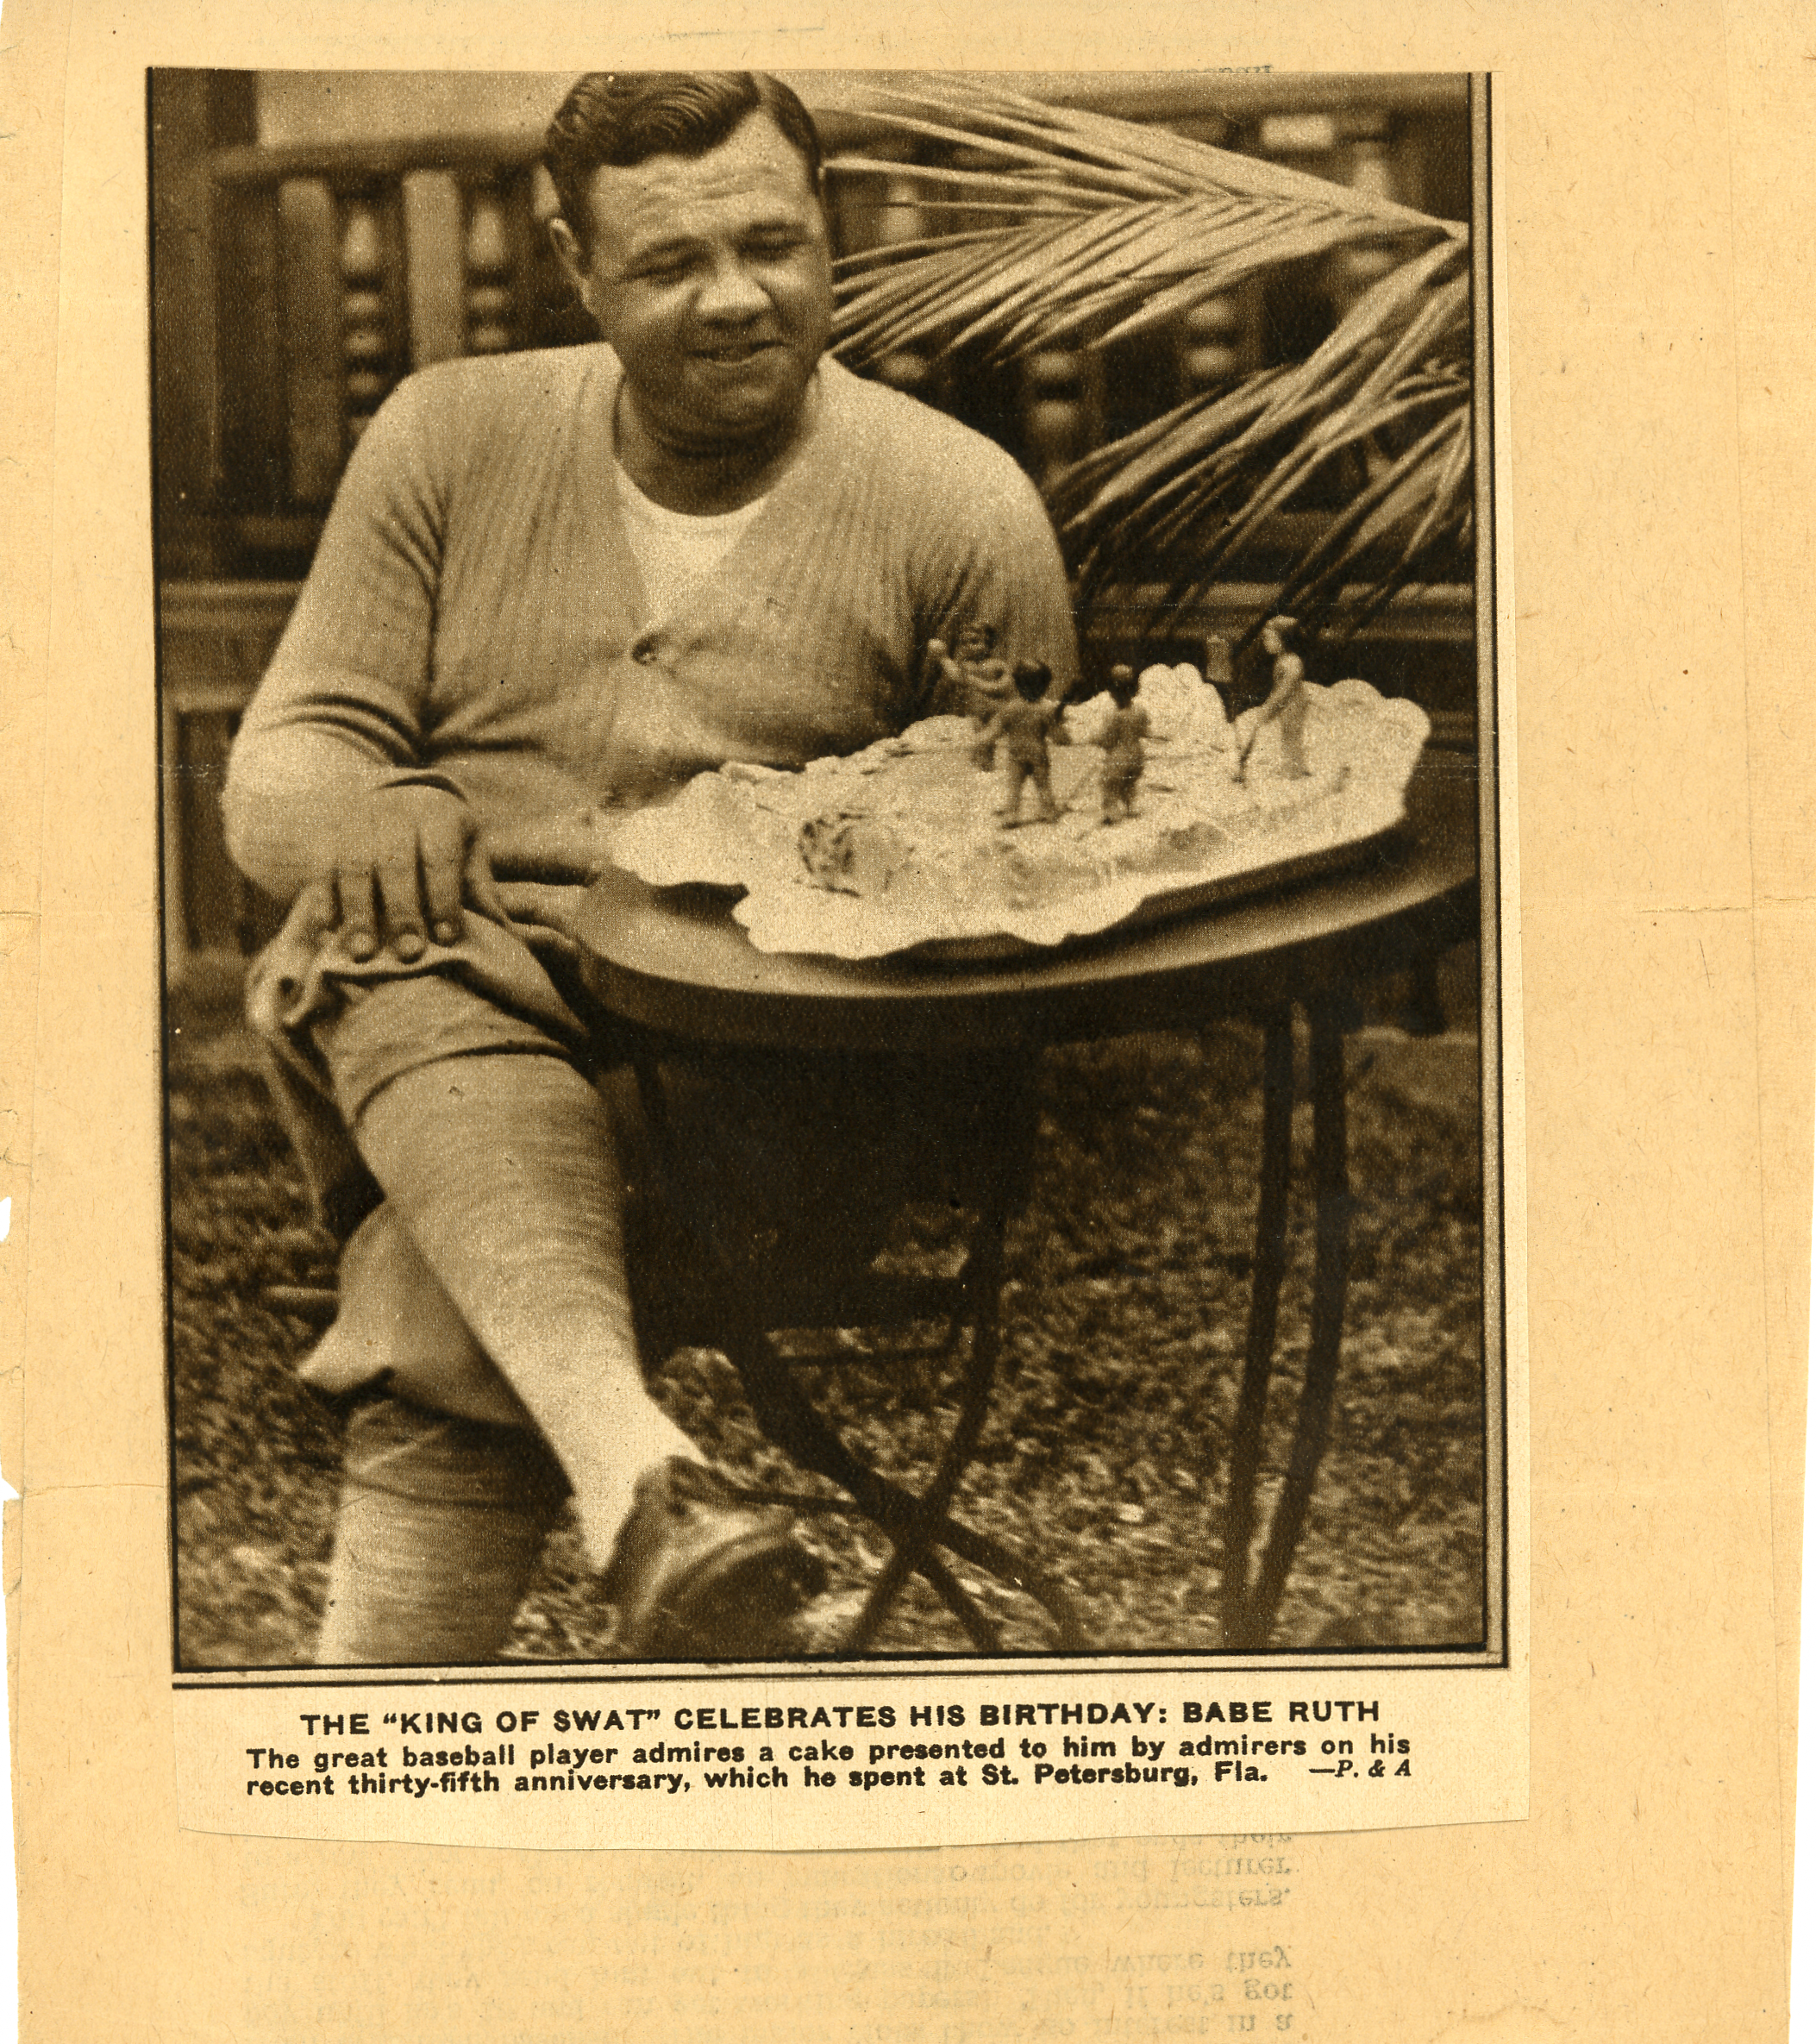 Newspaper photo of Babe Ruth celebrating his birthday in St. Petersburgh, FL